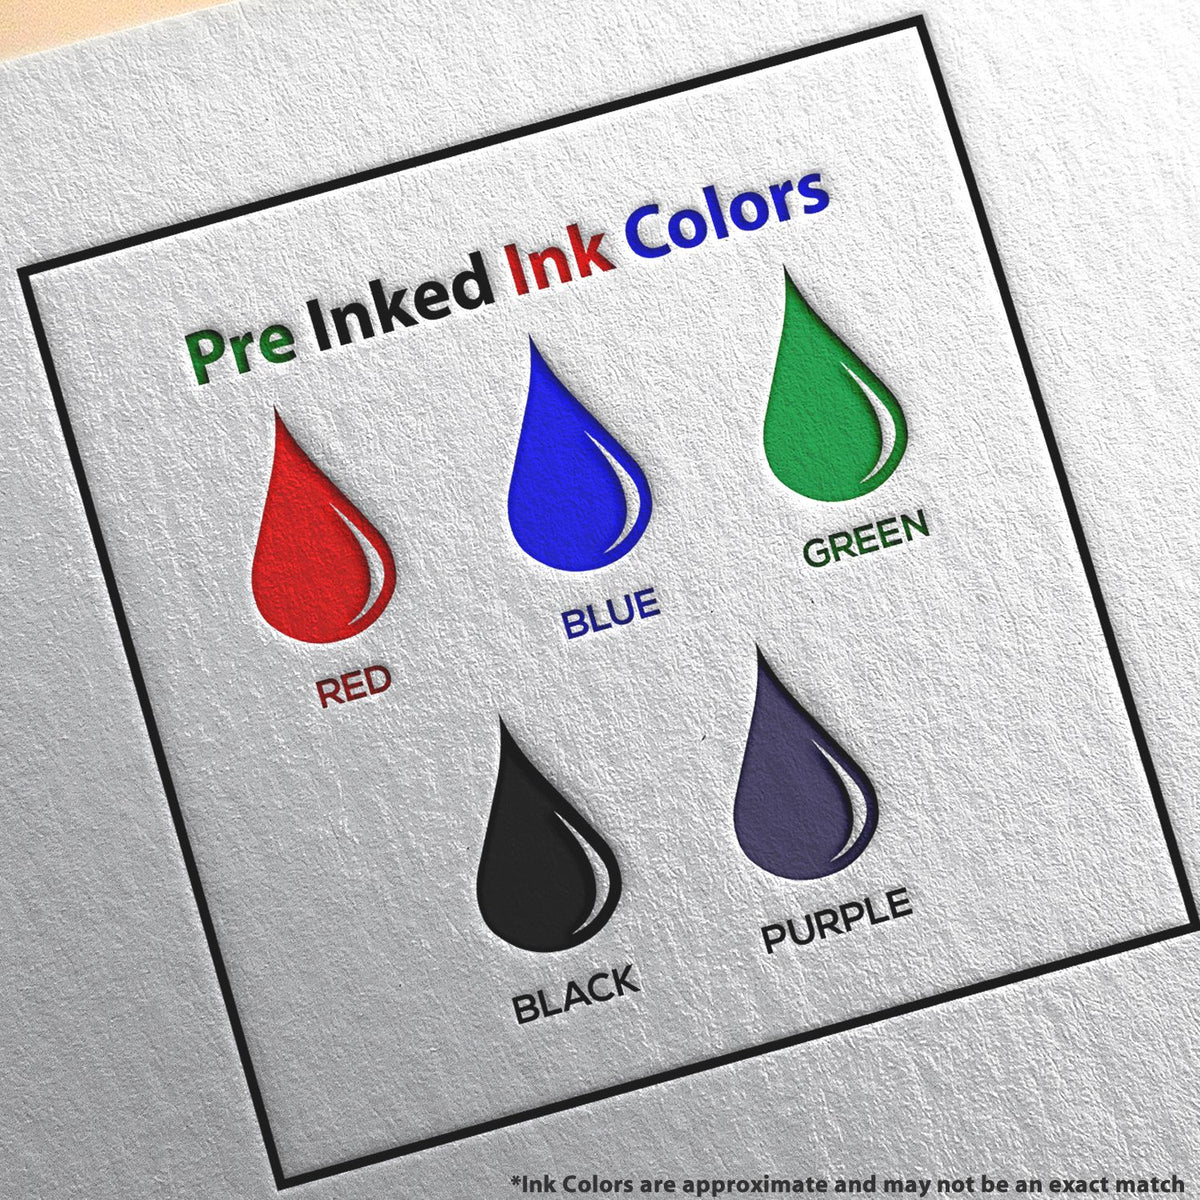 A picture showing the different ink colors or hues available for the Slim Pre-Inked Minnesota Landscape Architect Seal Stamp product.